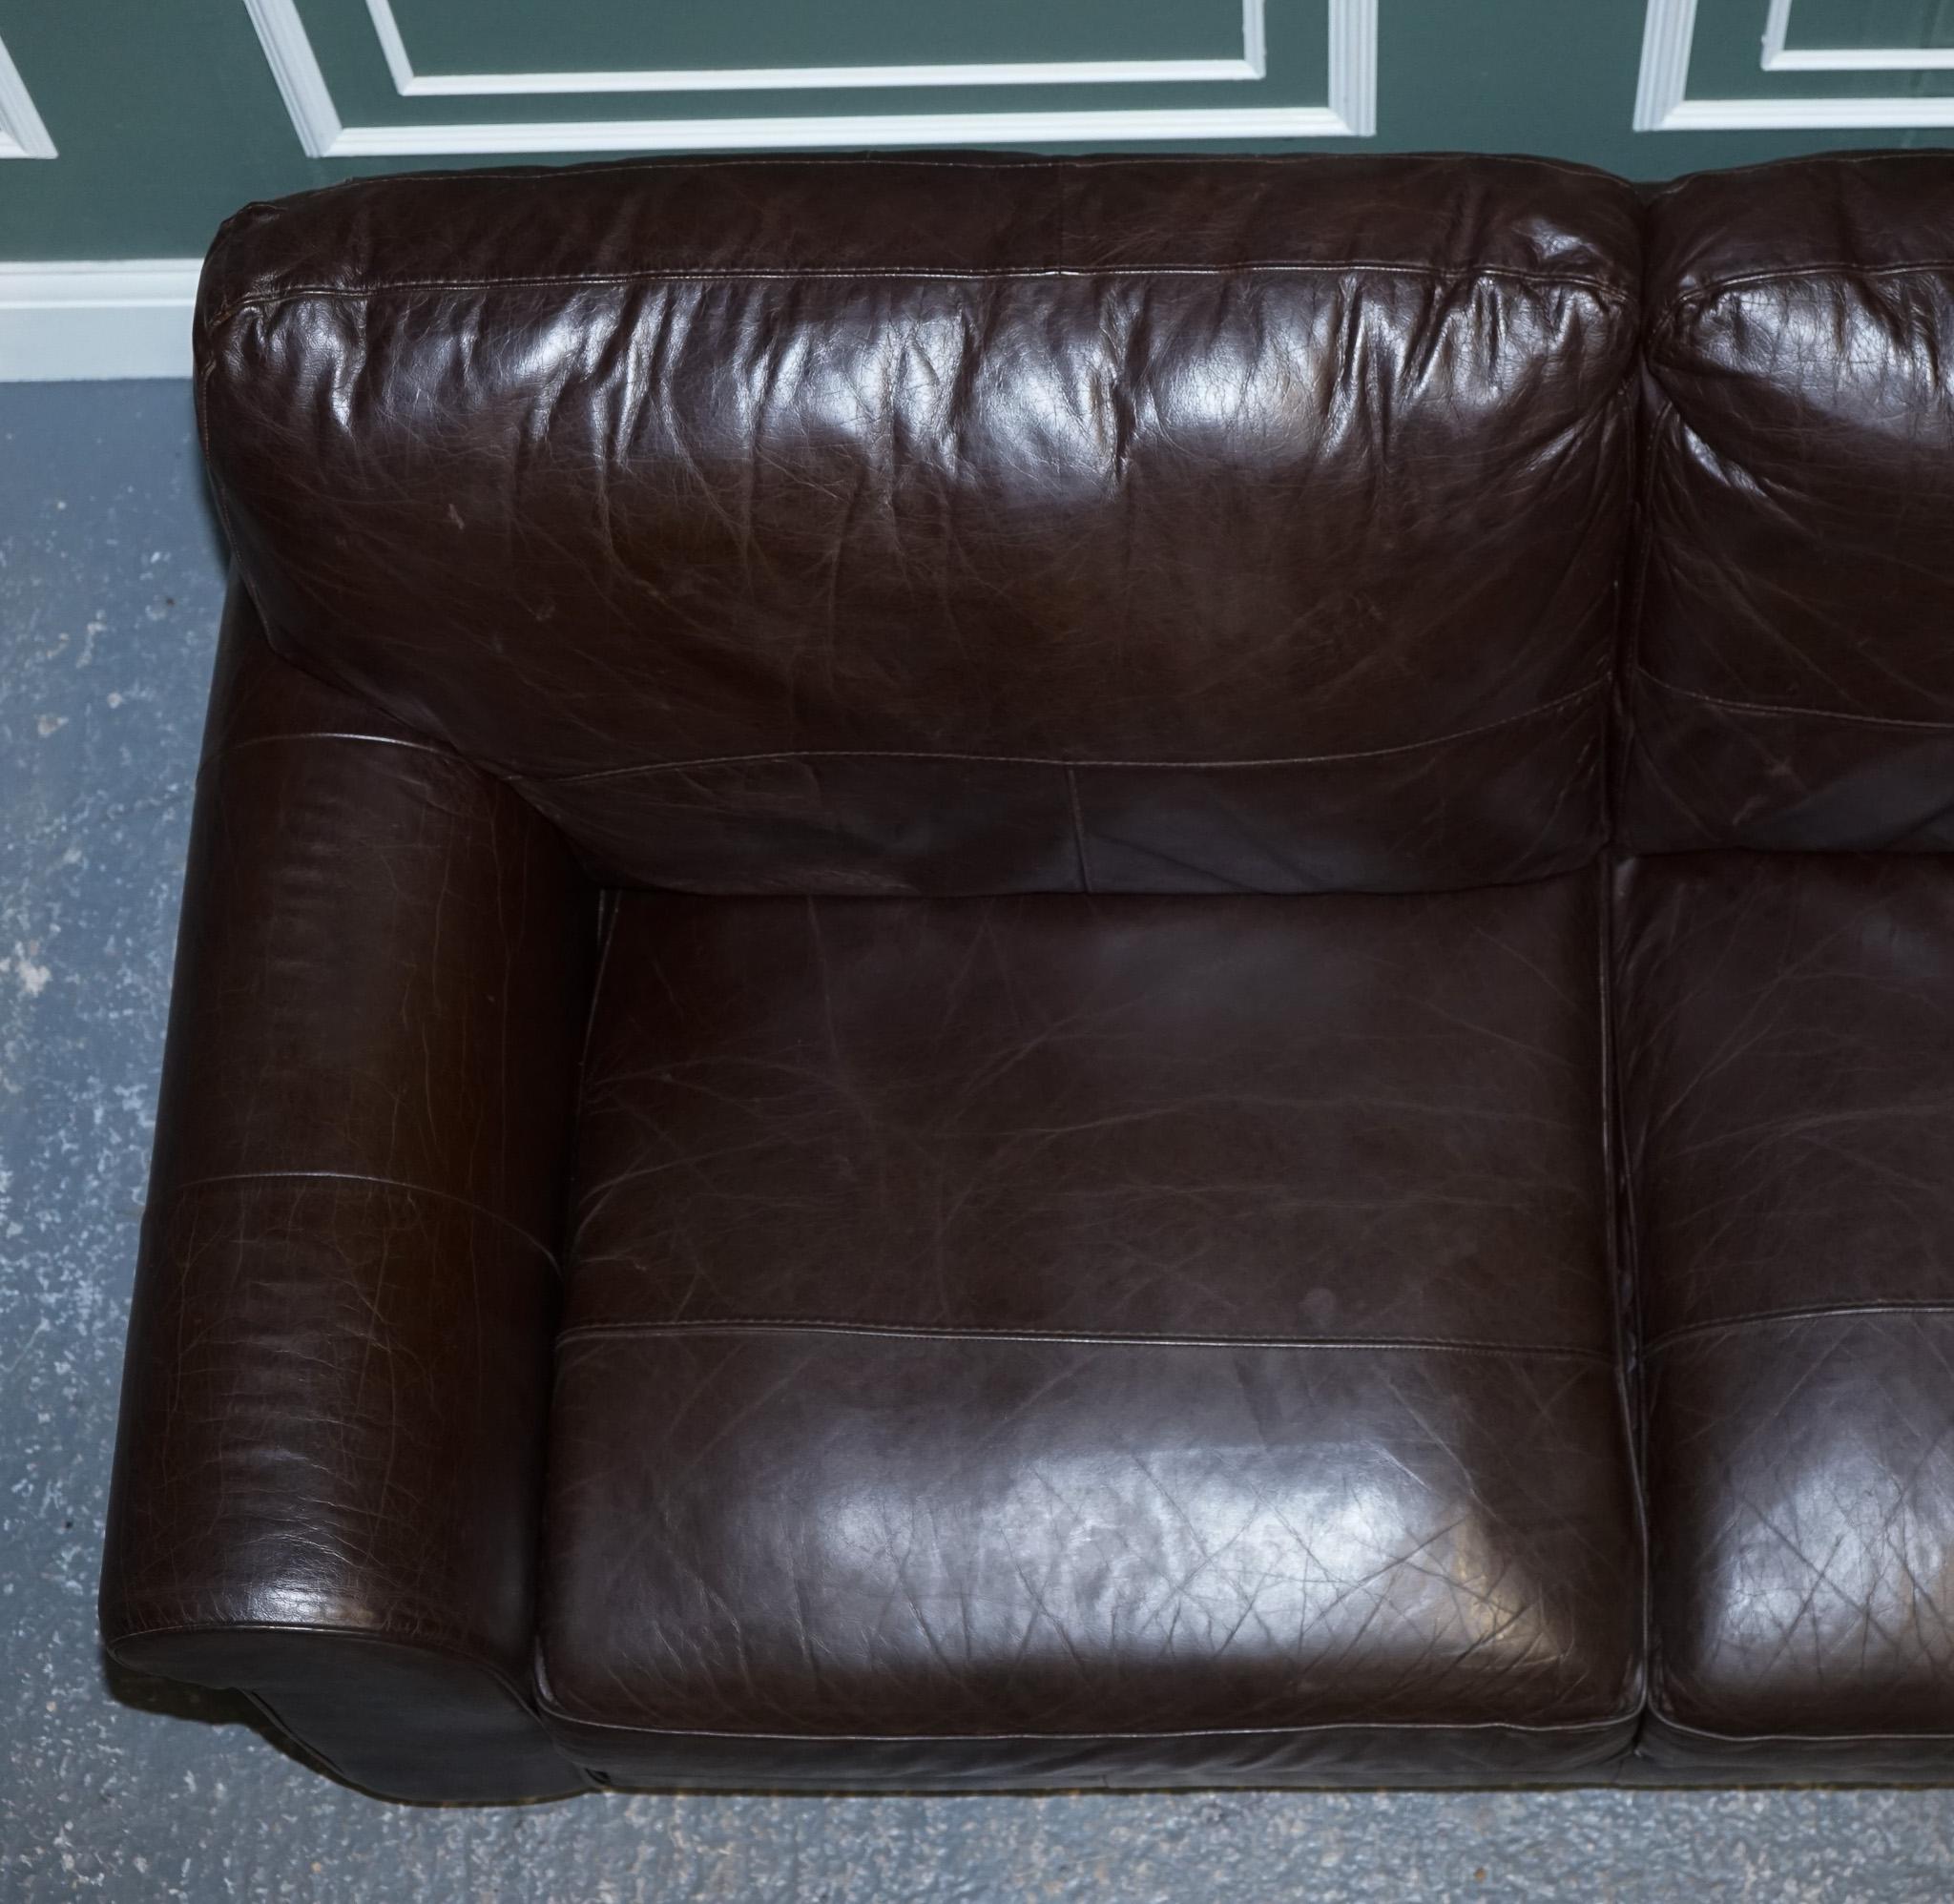 ViNTAGE CHOCOLATE BROWN TWO TO THREE SEATER SOFA In Good Condition For Sale In Pulborough, GB